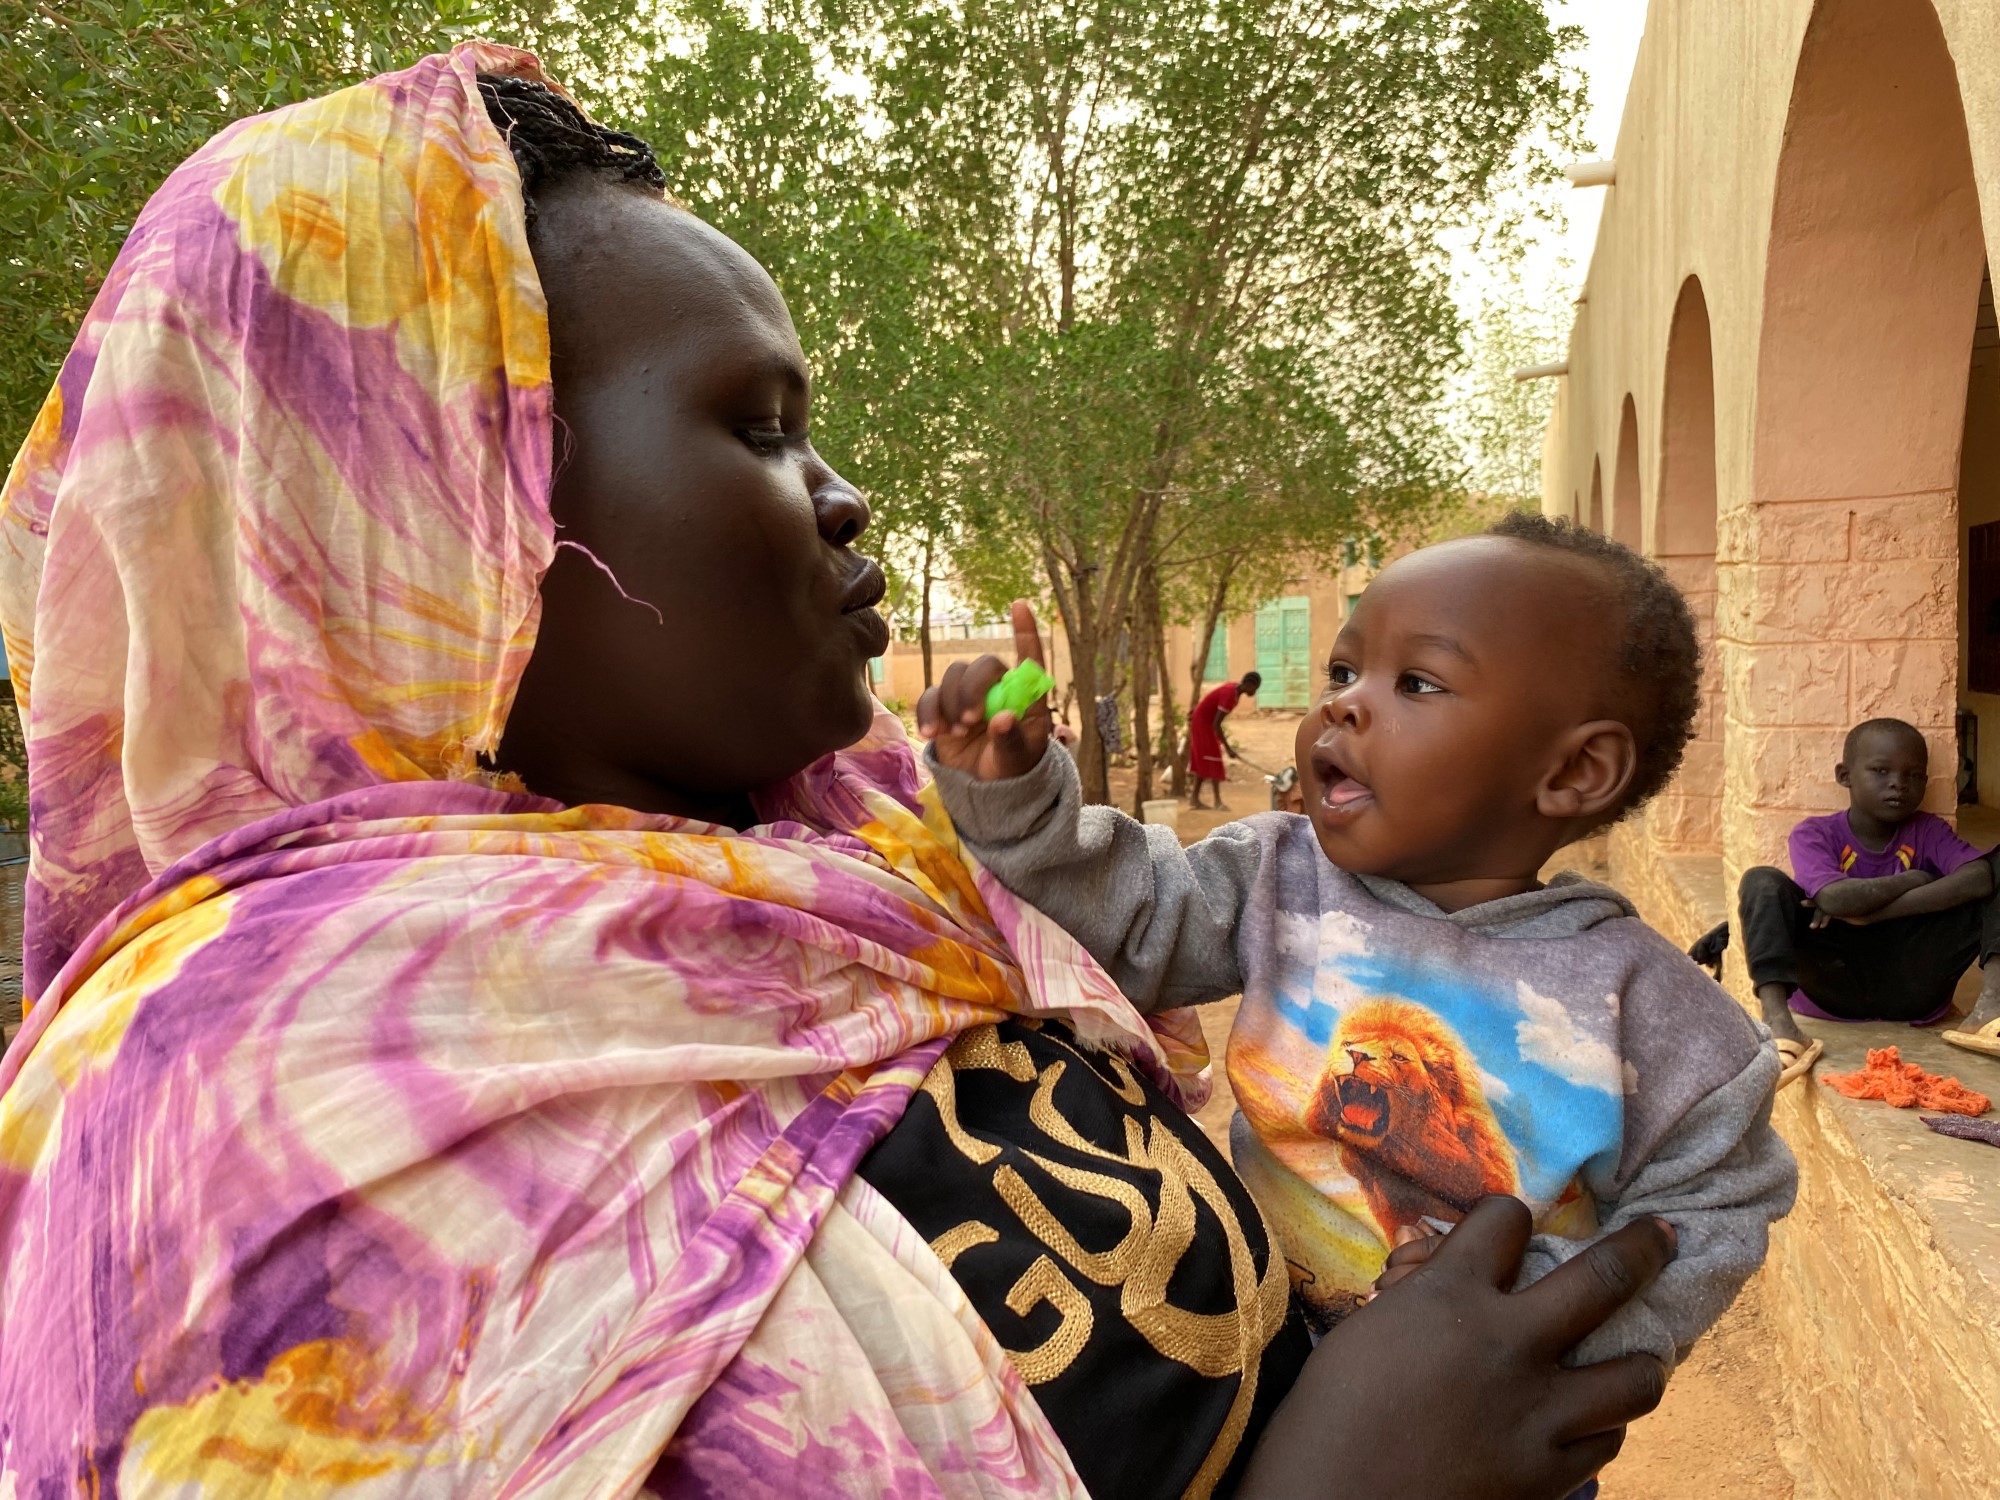 Mother and child in her arms in Sudan